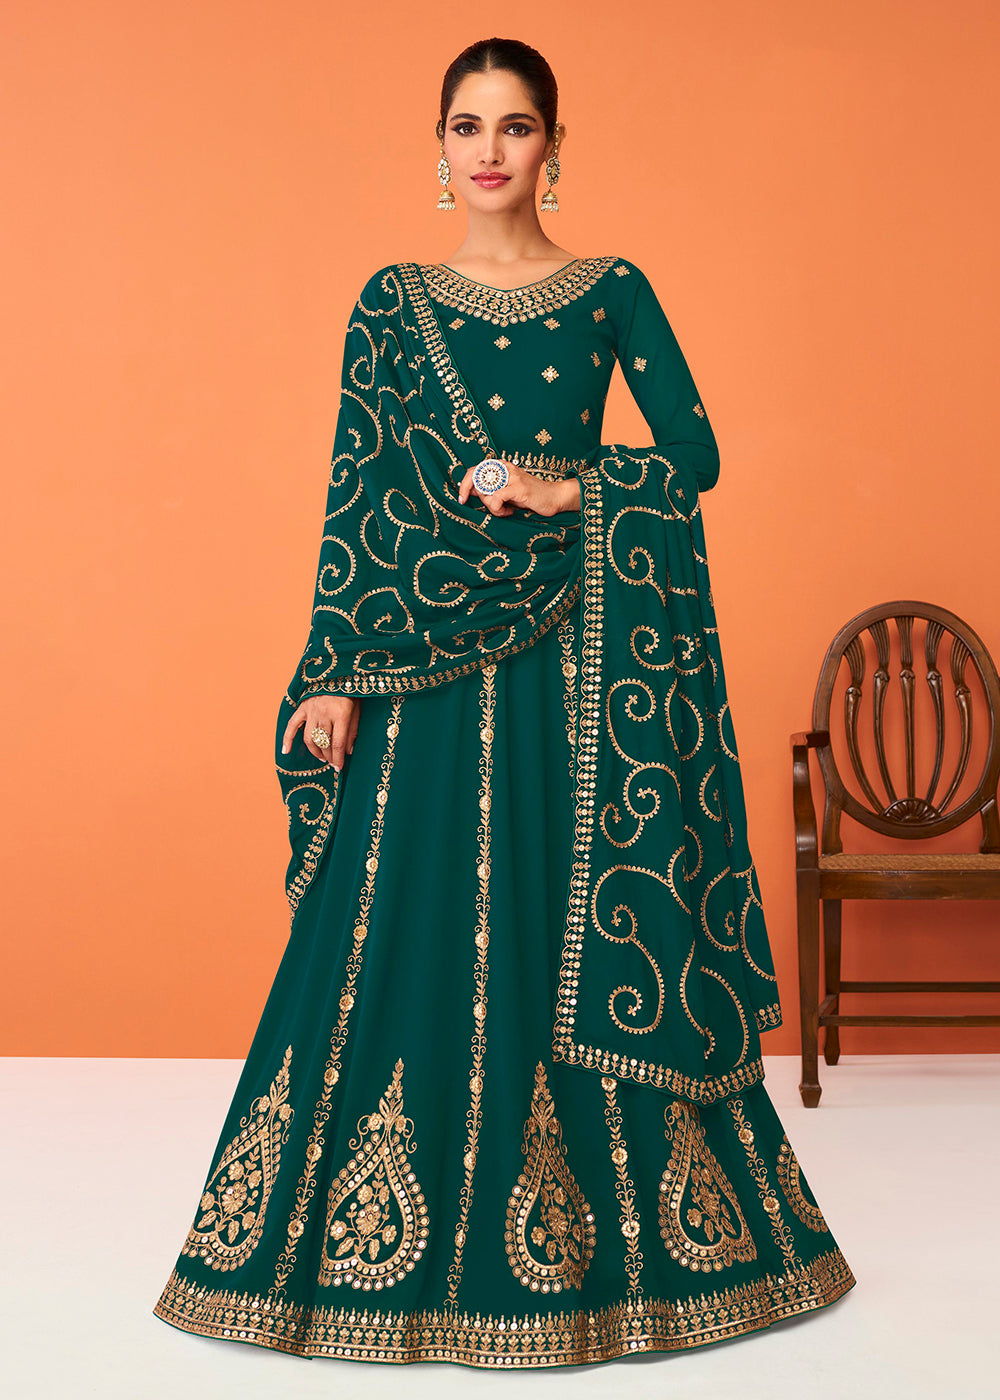 Buy Now Teal Green Festive Wear Embroidered Anarkali Suit Online in USA, UK, Australia, New Zealand, Canada & Worldwide at Empress Clothing. 